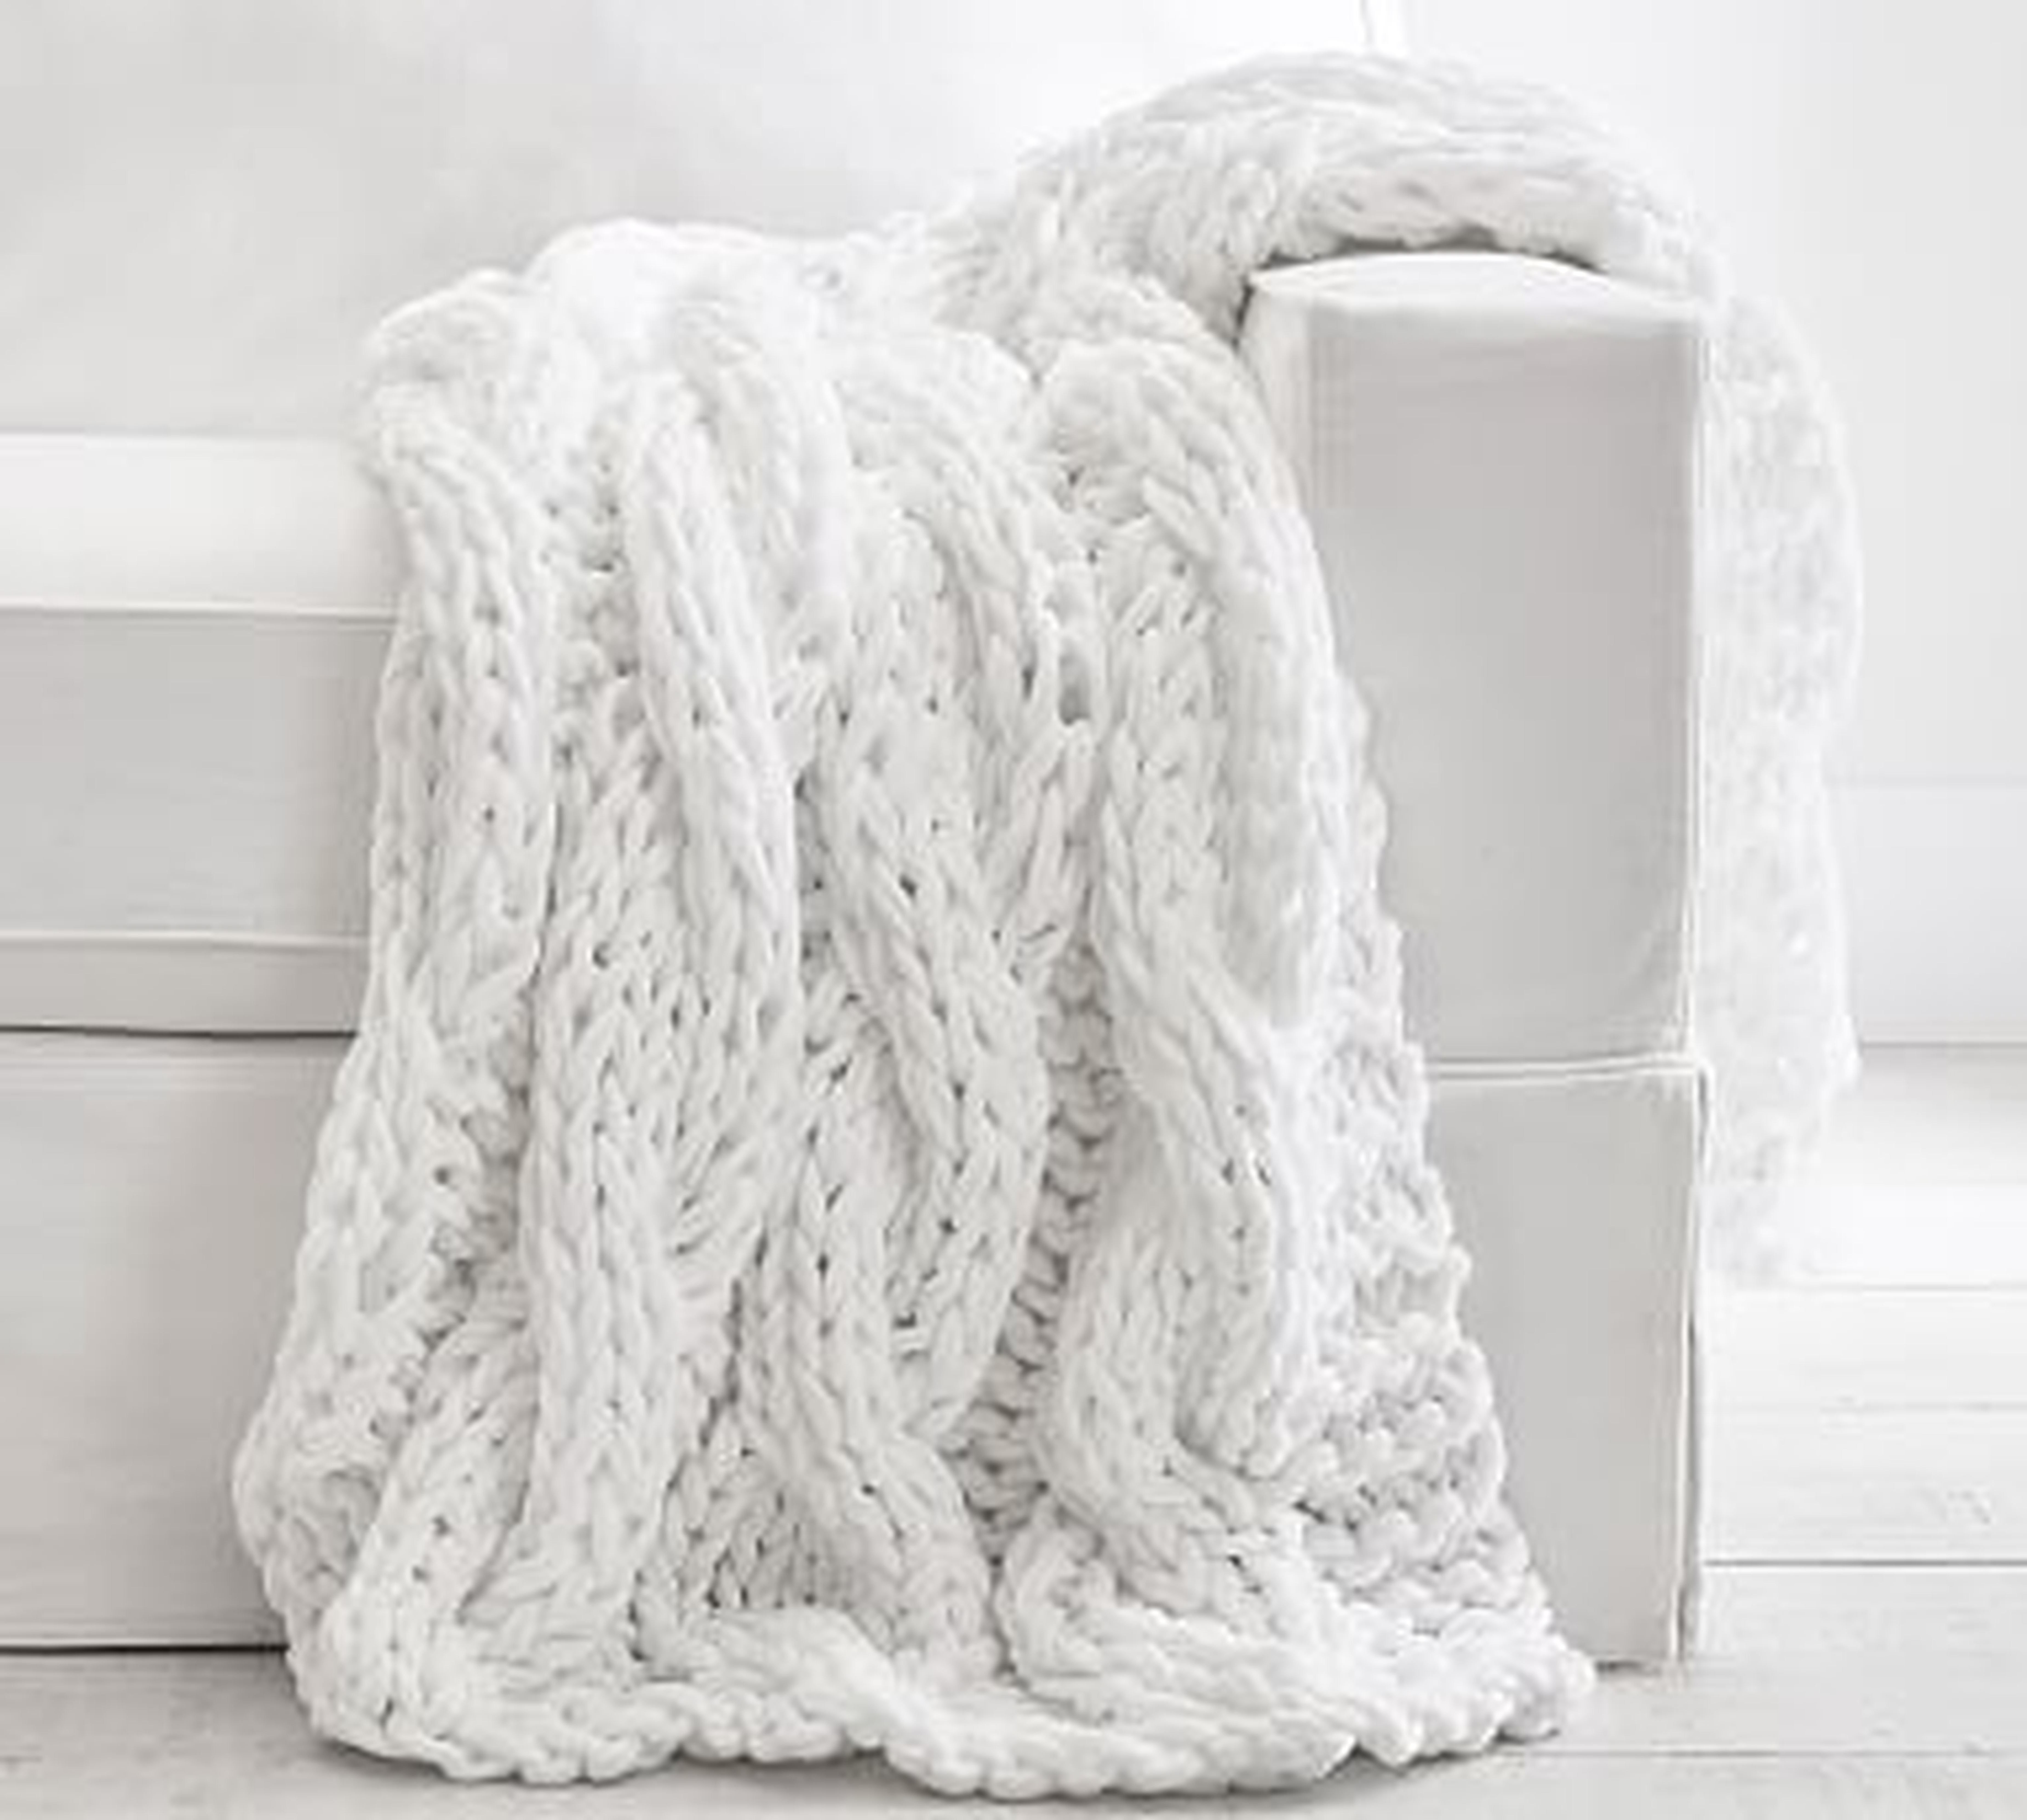 Colossal Handknit Throw, 44 x 56", White - Pottery Barn